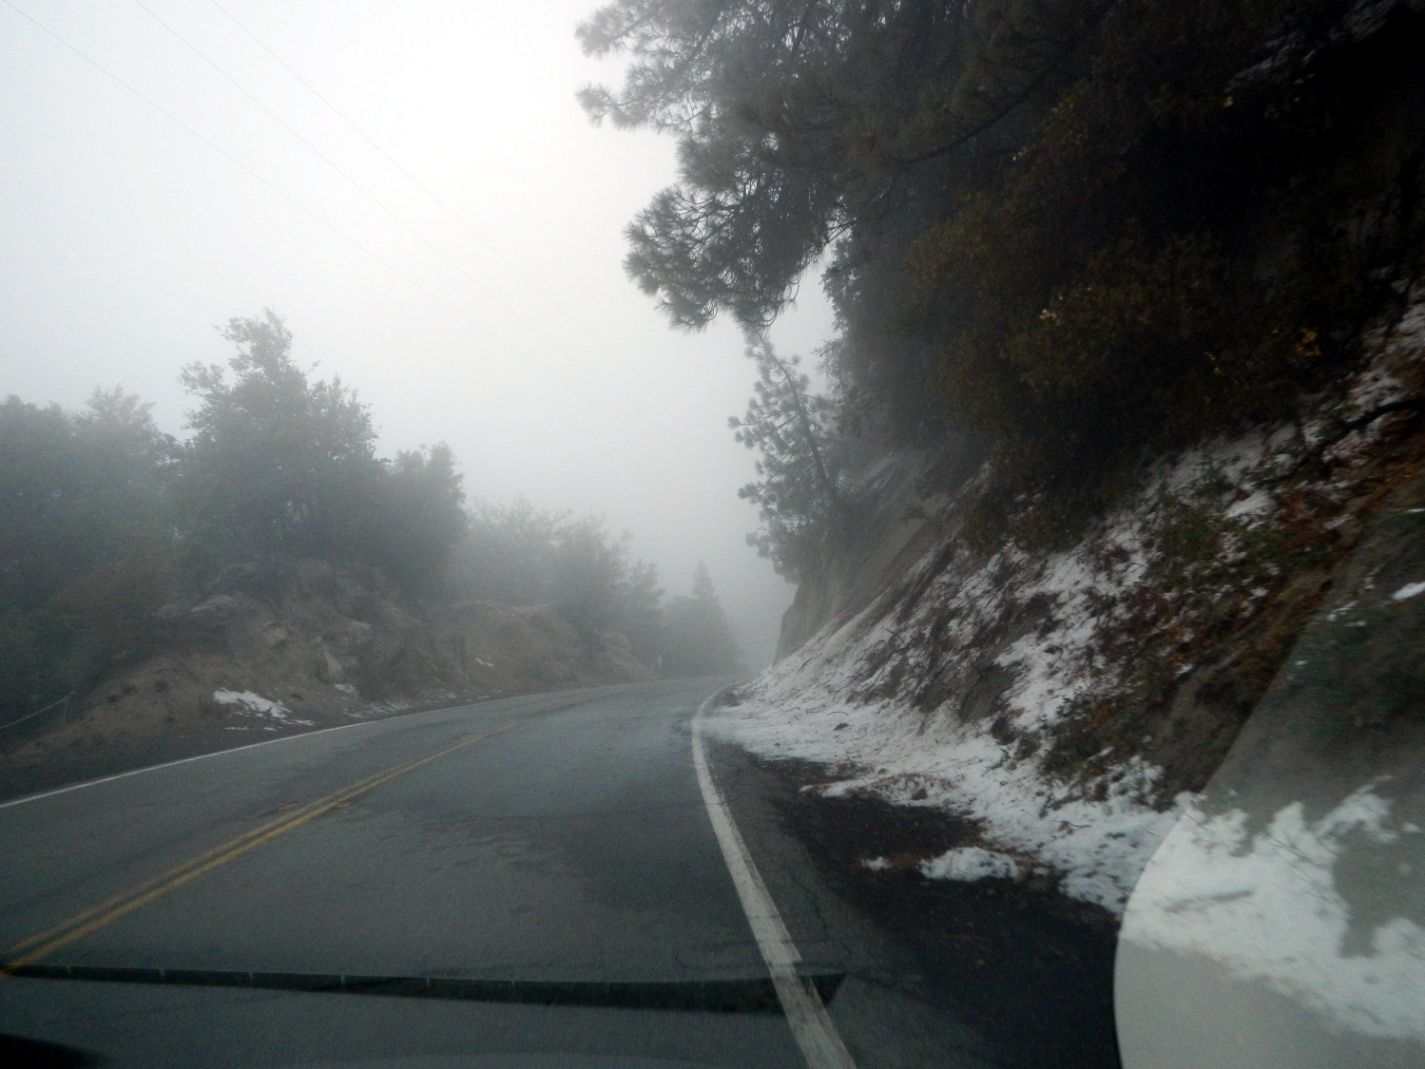 Road from Idyllwild